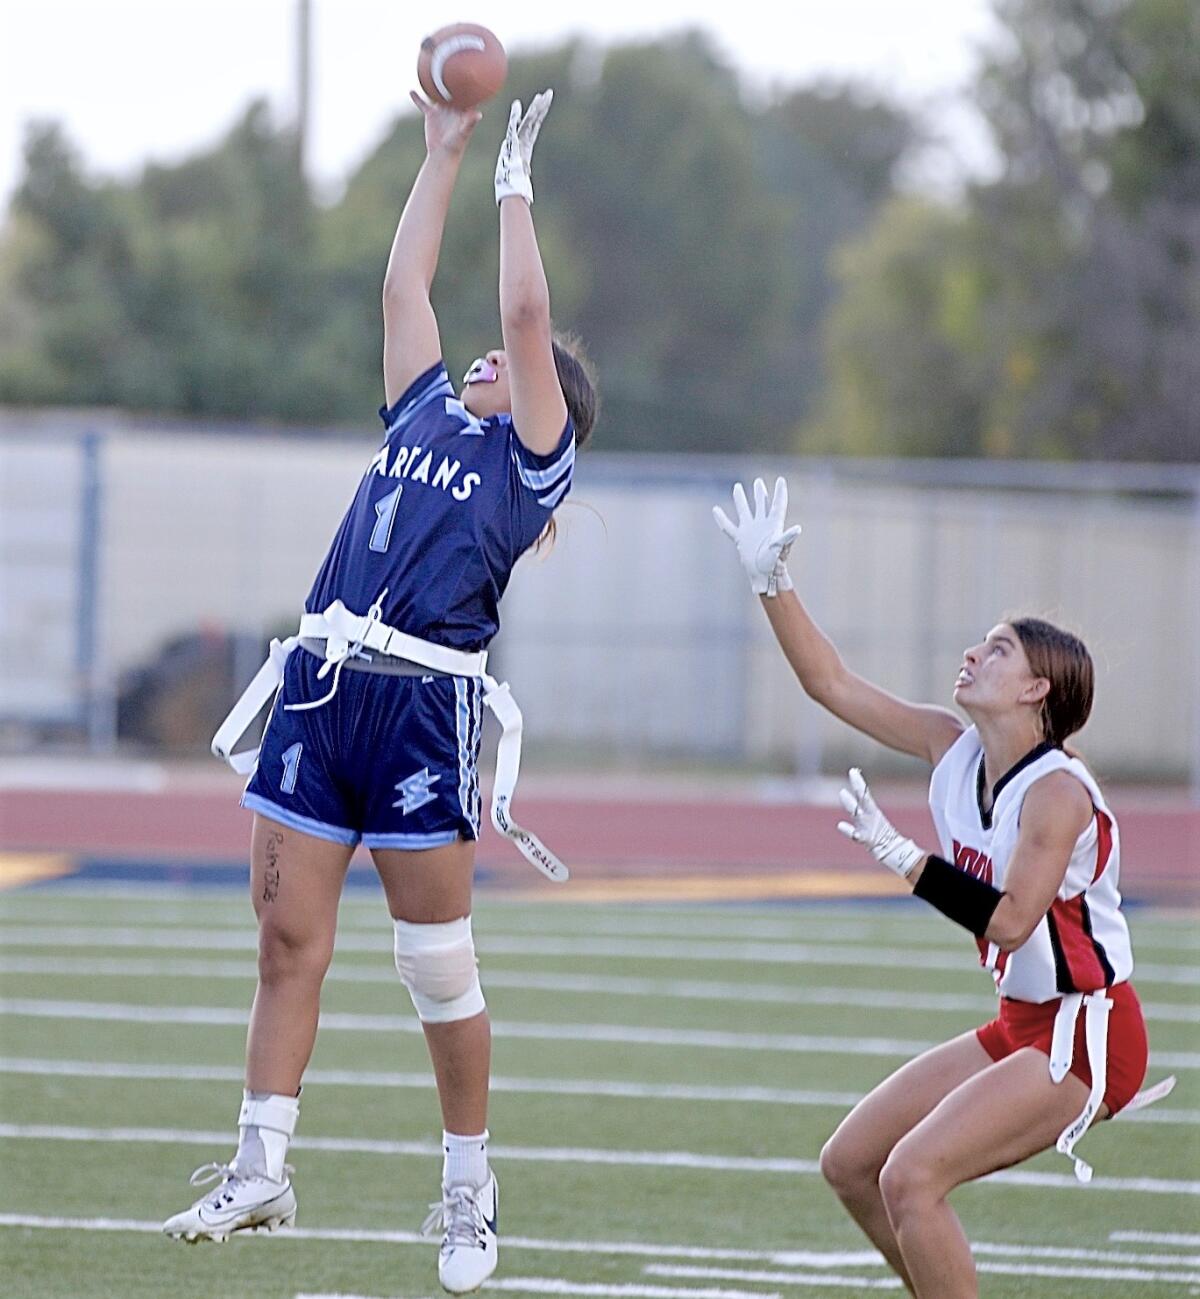 Sylmar’s Mia Ceja makes a leaping catch in front of Verdugo Hills defensive back Lauren Brink in the Dons’ 29-20 victory.